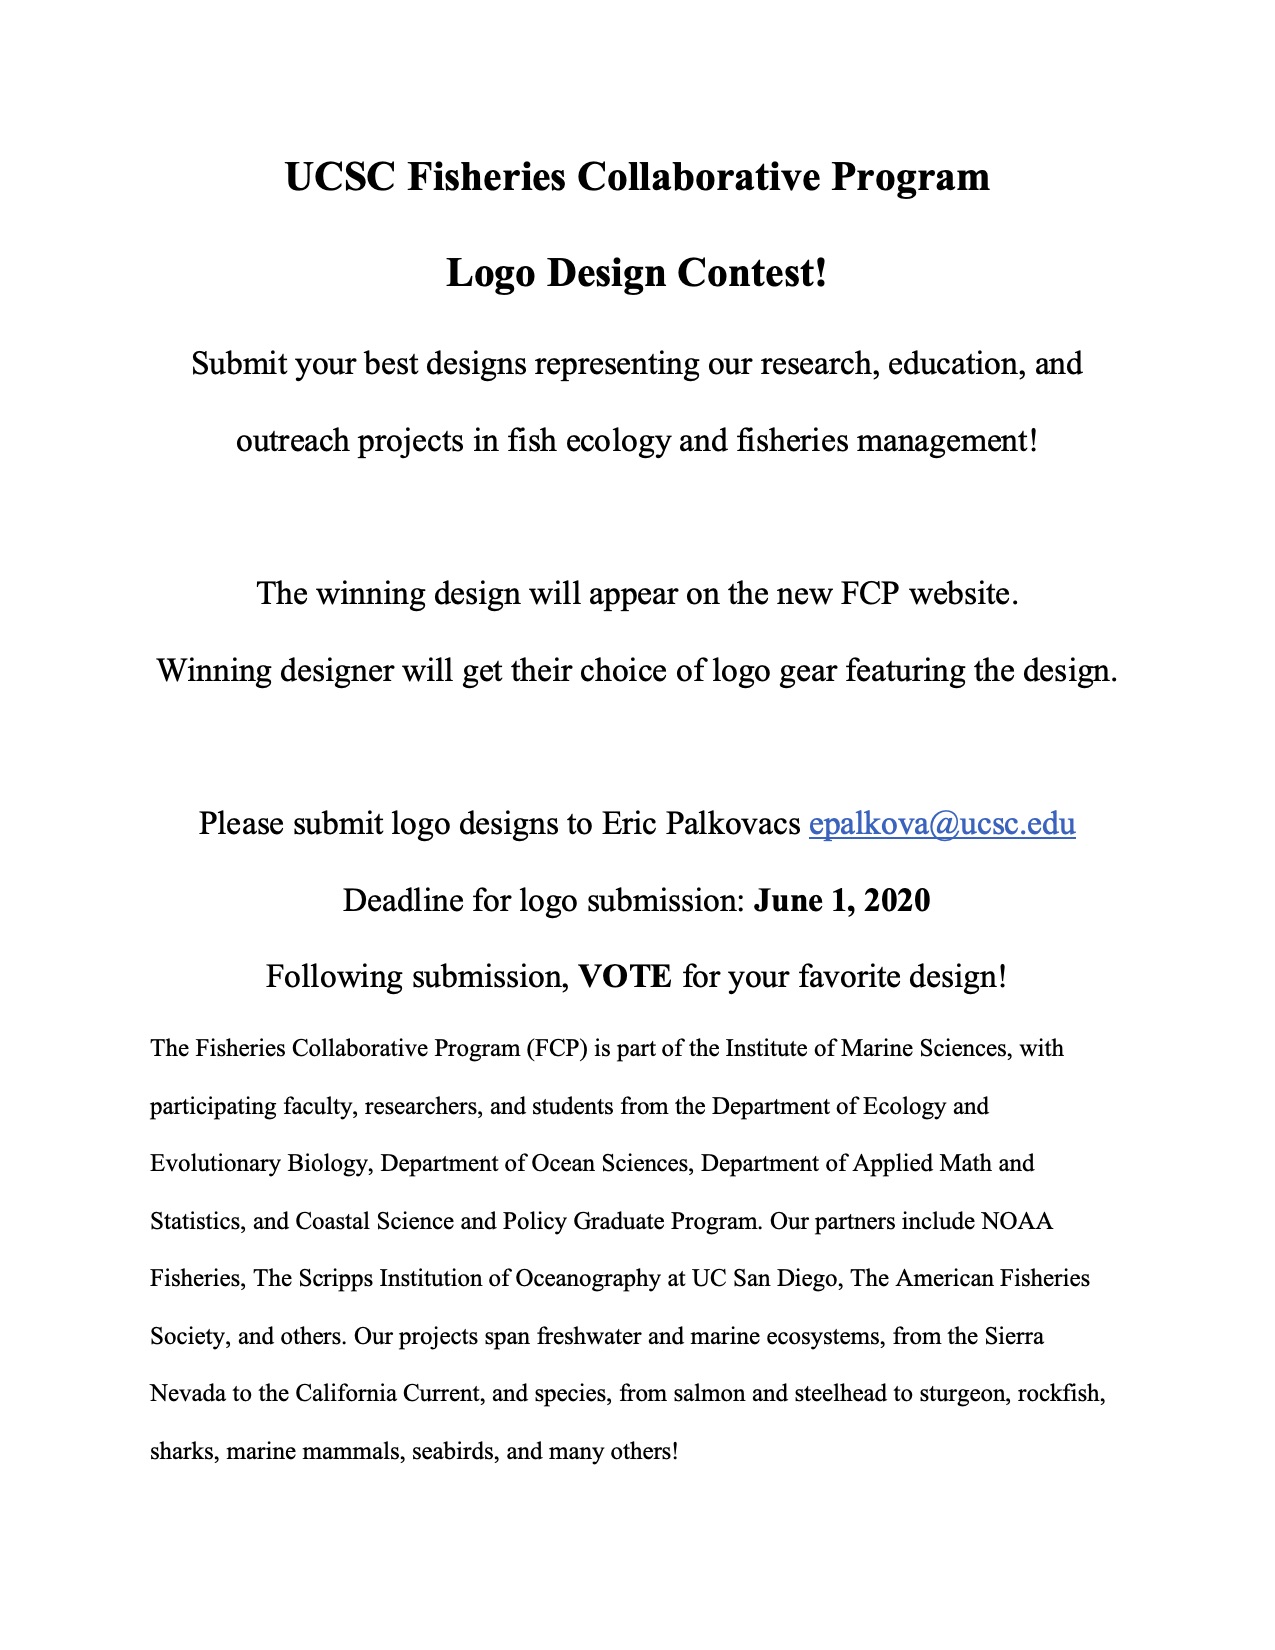 Submit your design for the UCSC Fisheries Collaborative Program!